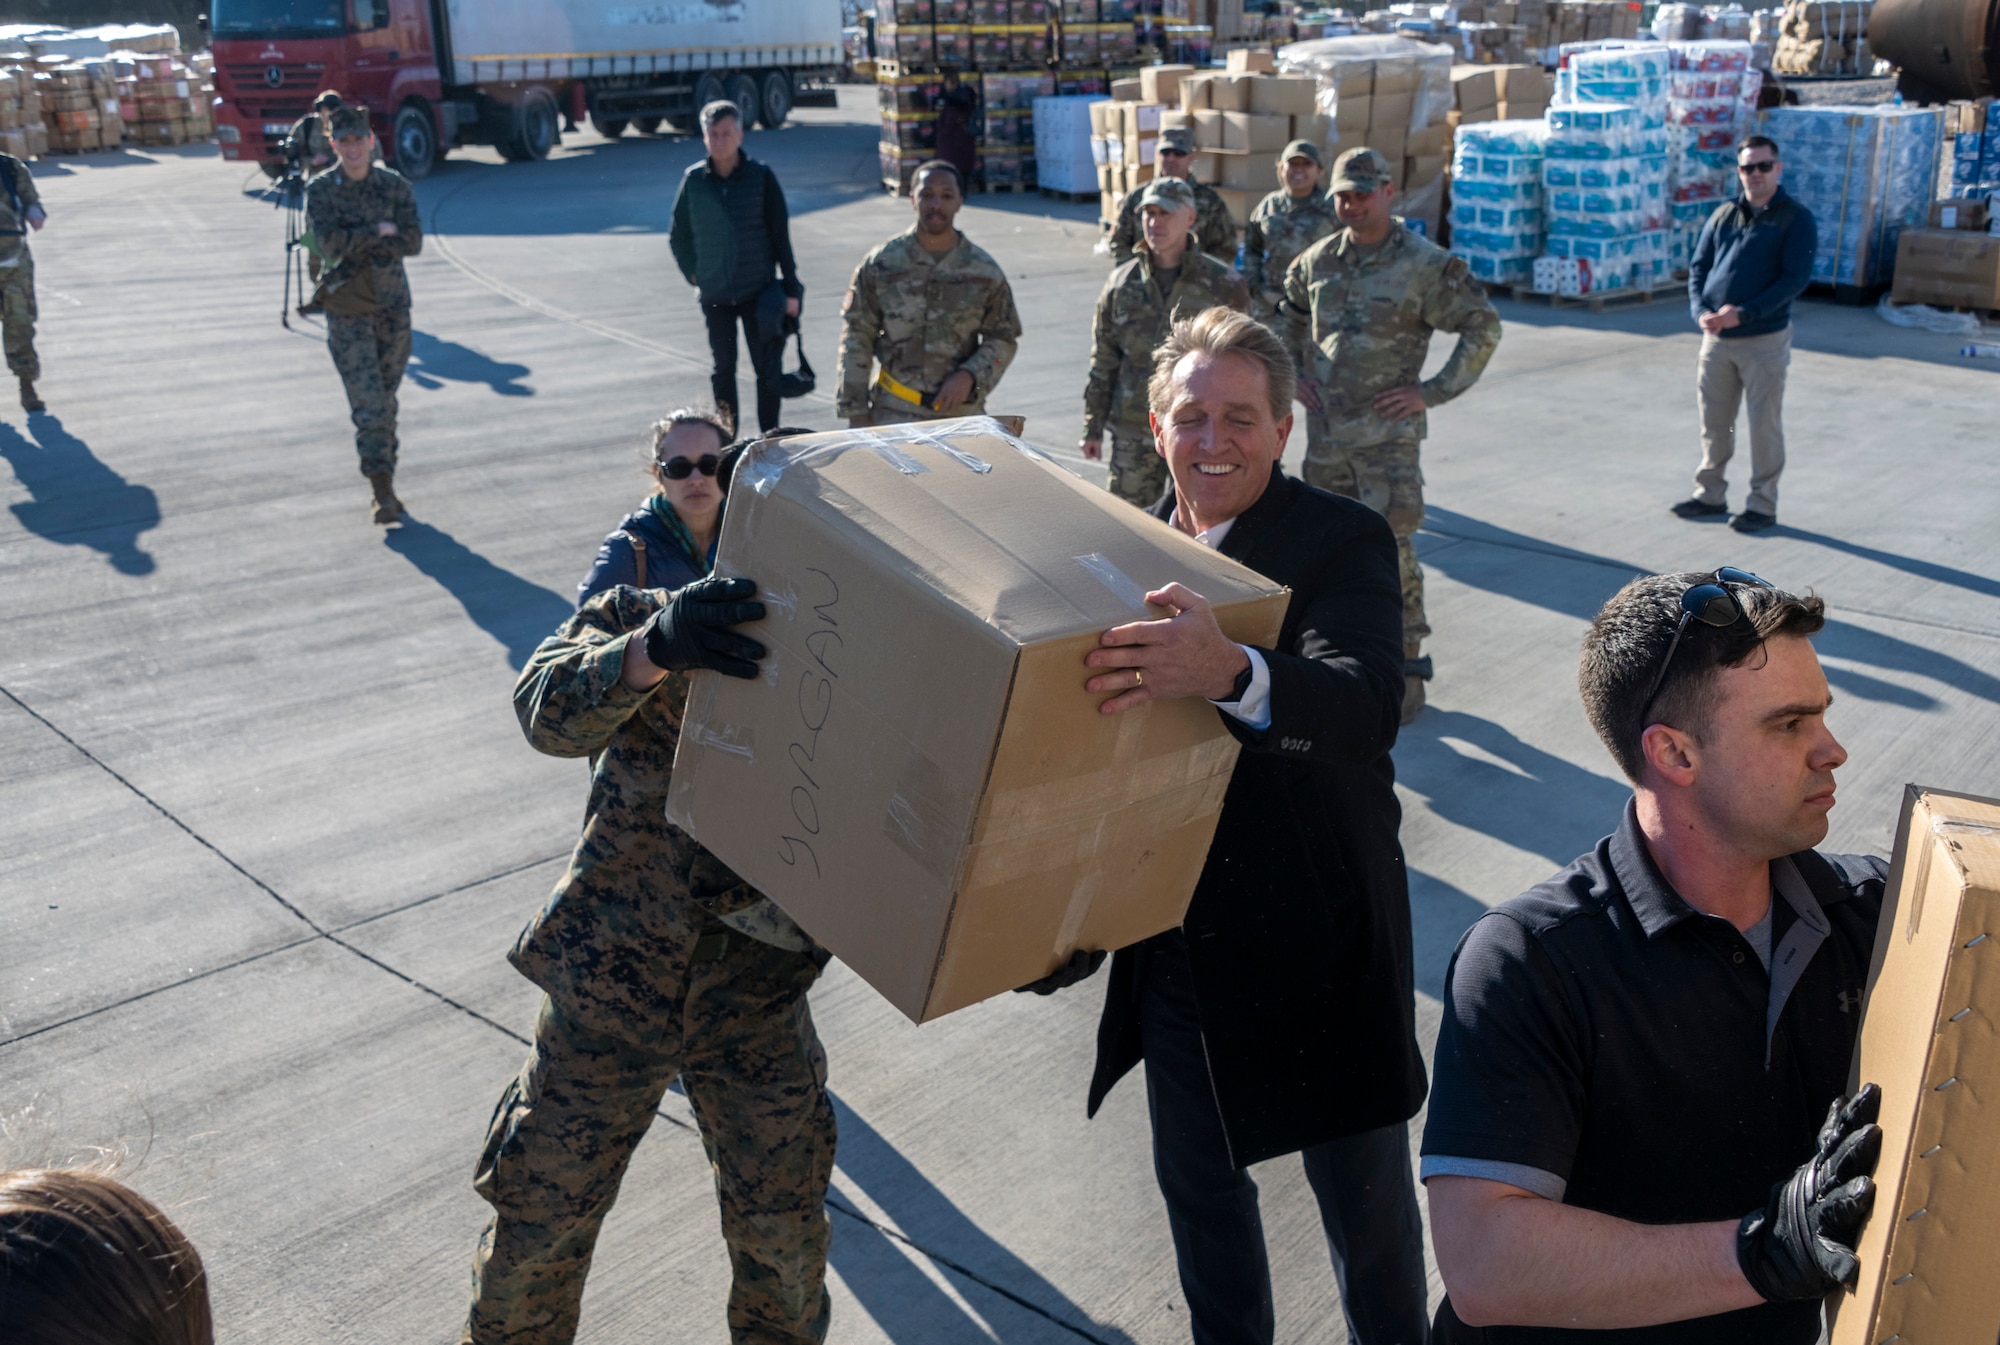 U.S. Ambassador Jeffry Flake, U.S. Ambassador to Türkiye, right, loads disaster relief supplies onto a truck with a U.S. Marine during his visit to Incirlik Air Base, Türkiye, Feb 13, 2023. Ambassador Flake visited Incirlik AB to discuss the recent earthquakes that struck central-southern Türkiye on Feb 6, 2023, and see the humanitarian support efforts first-hand. As Ambassador to Türkiye, Flake holds the highest civilian position as The Chief of Mission, and impacts the communication and resources of U.S. personnel, advancing the U.S. foreign policy goals. As a fellow NATO ally, the U.S. Government mobilized personnel to assist Türkiye in their response efforts. (U.S. Air Force photo by Senior Airman David D. McLoney)